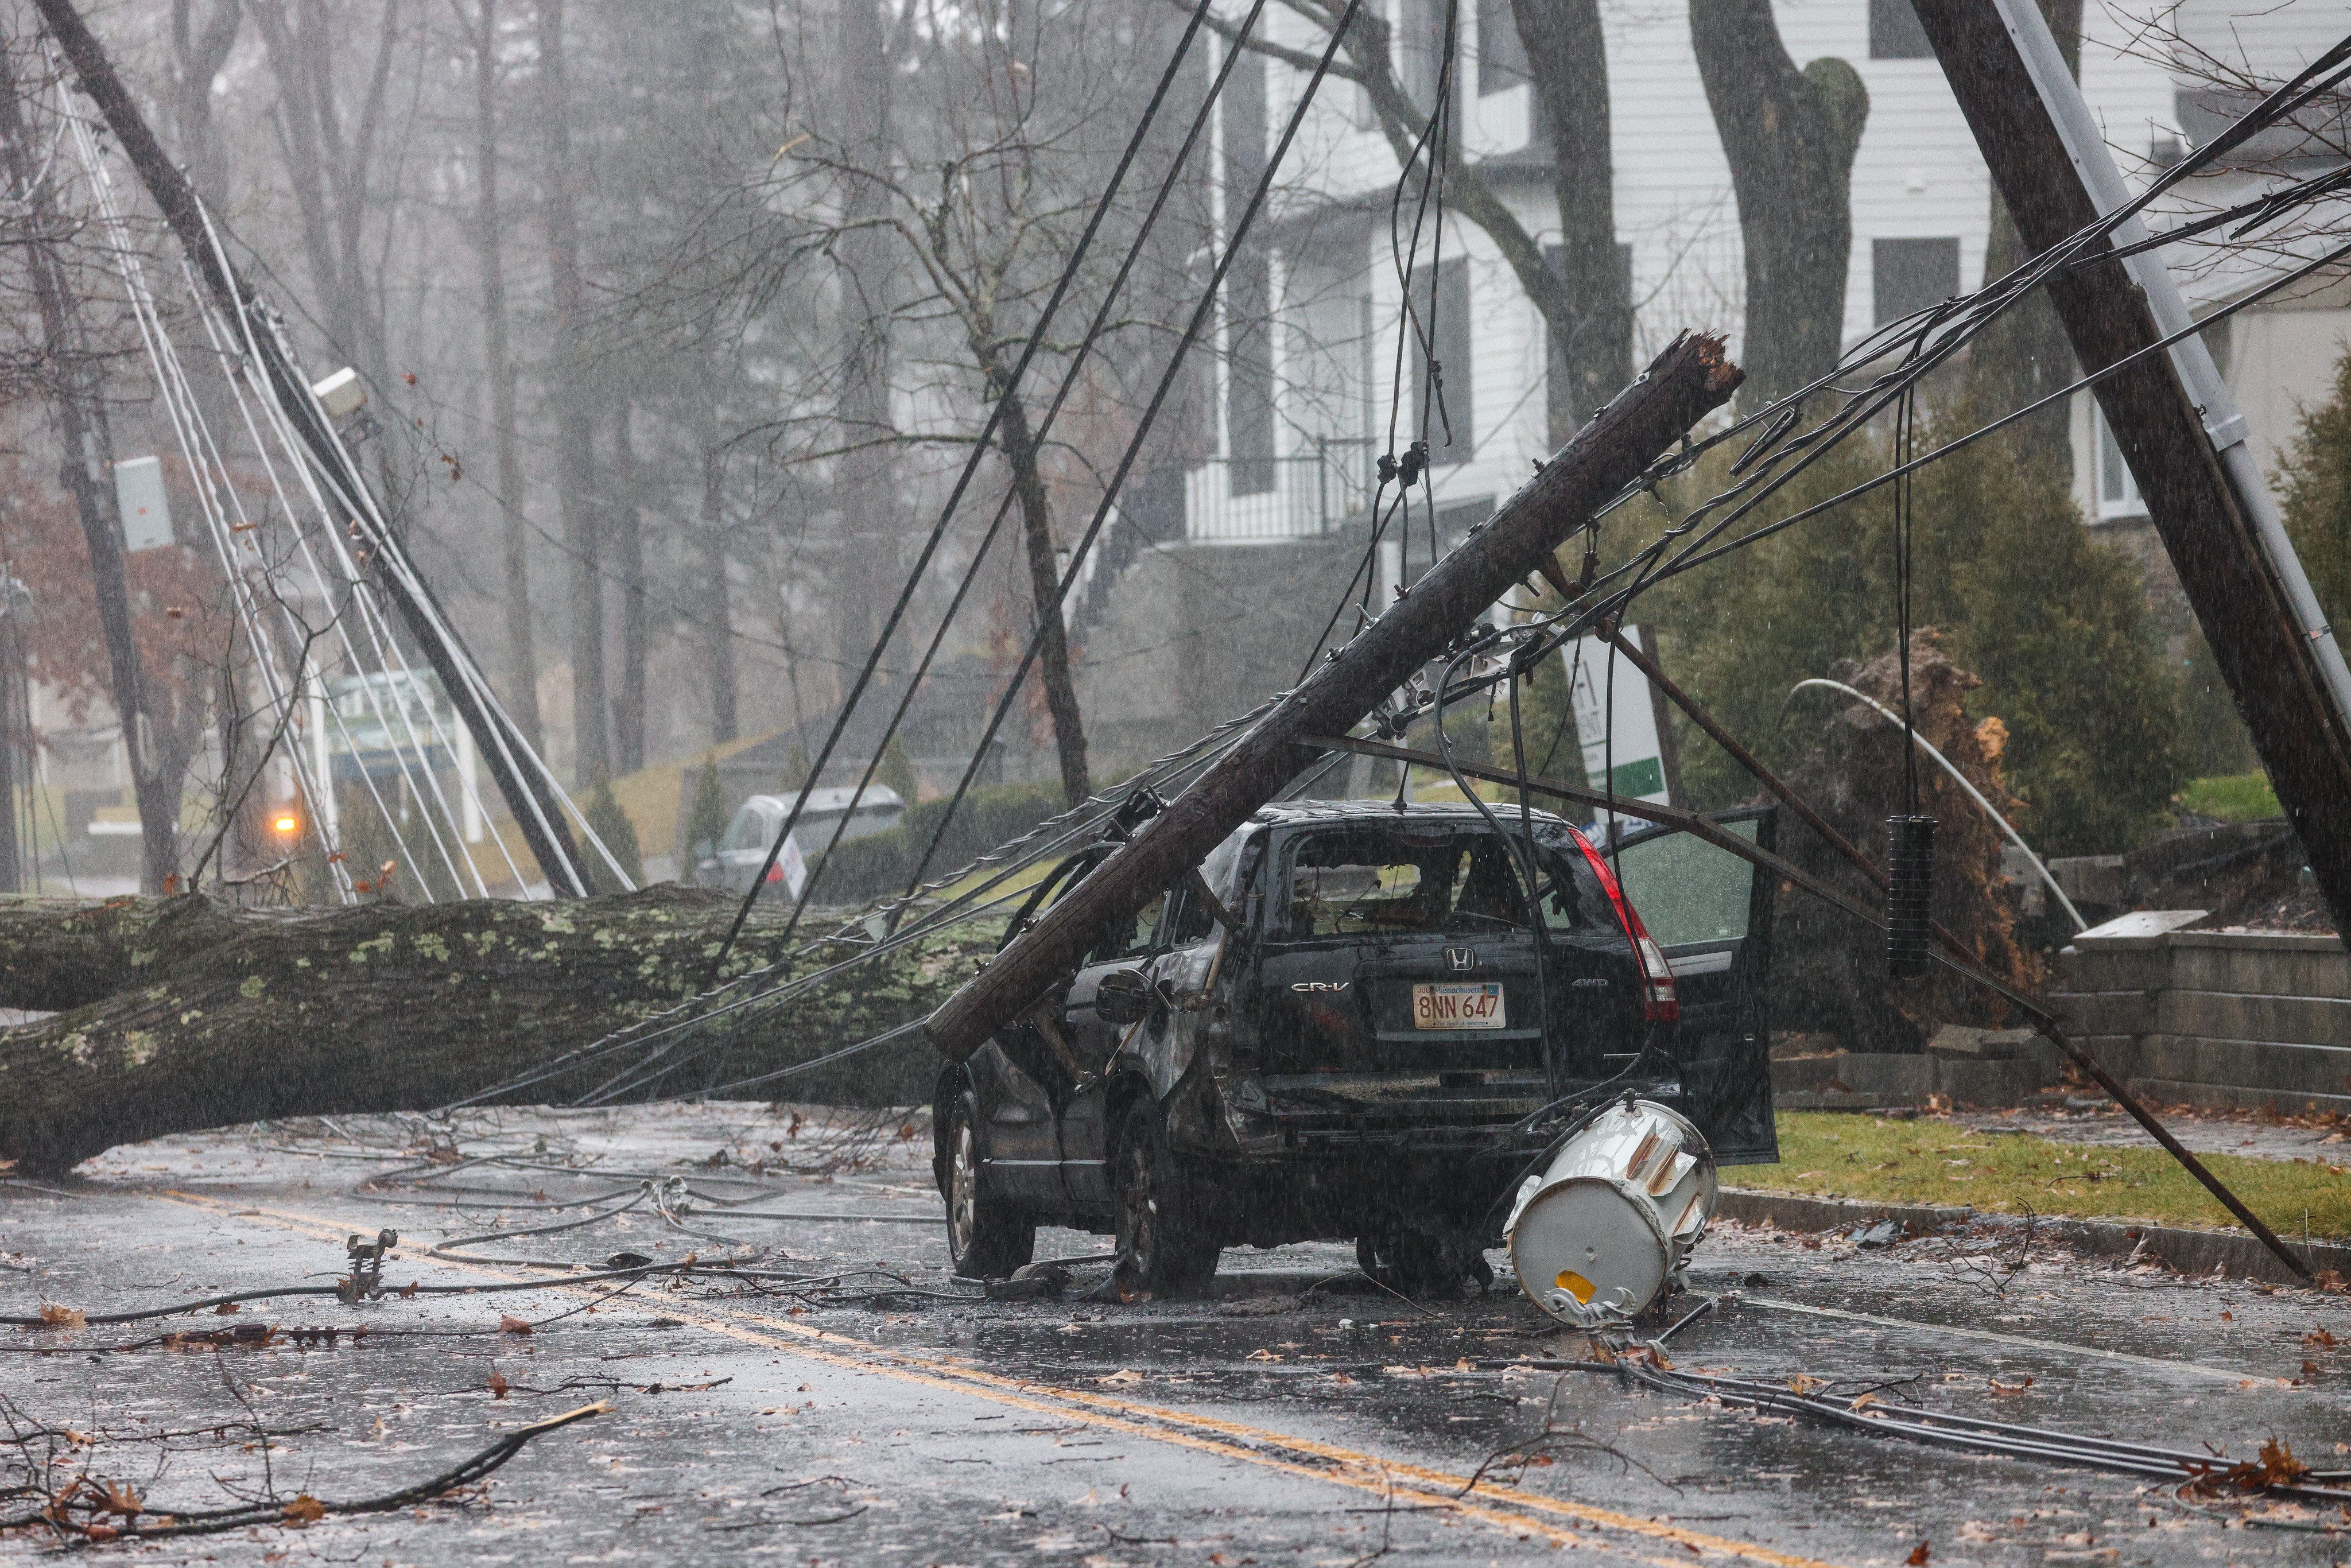 A tree fell on power lines, damaging an SUV as well, on Dedham Street in Newton, Massachusetts, as a storm hit the region on Monday, Dec. 18, 2023.